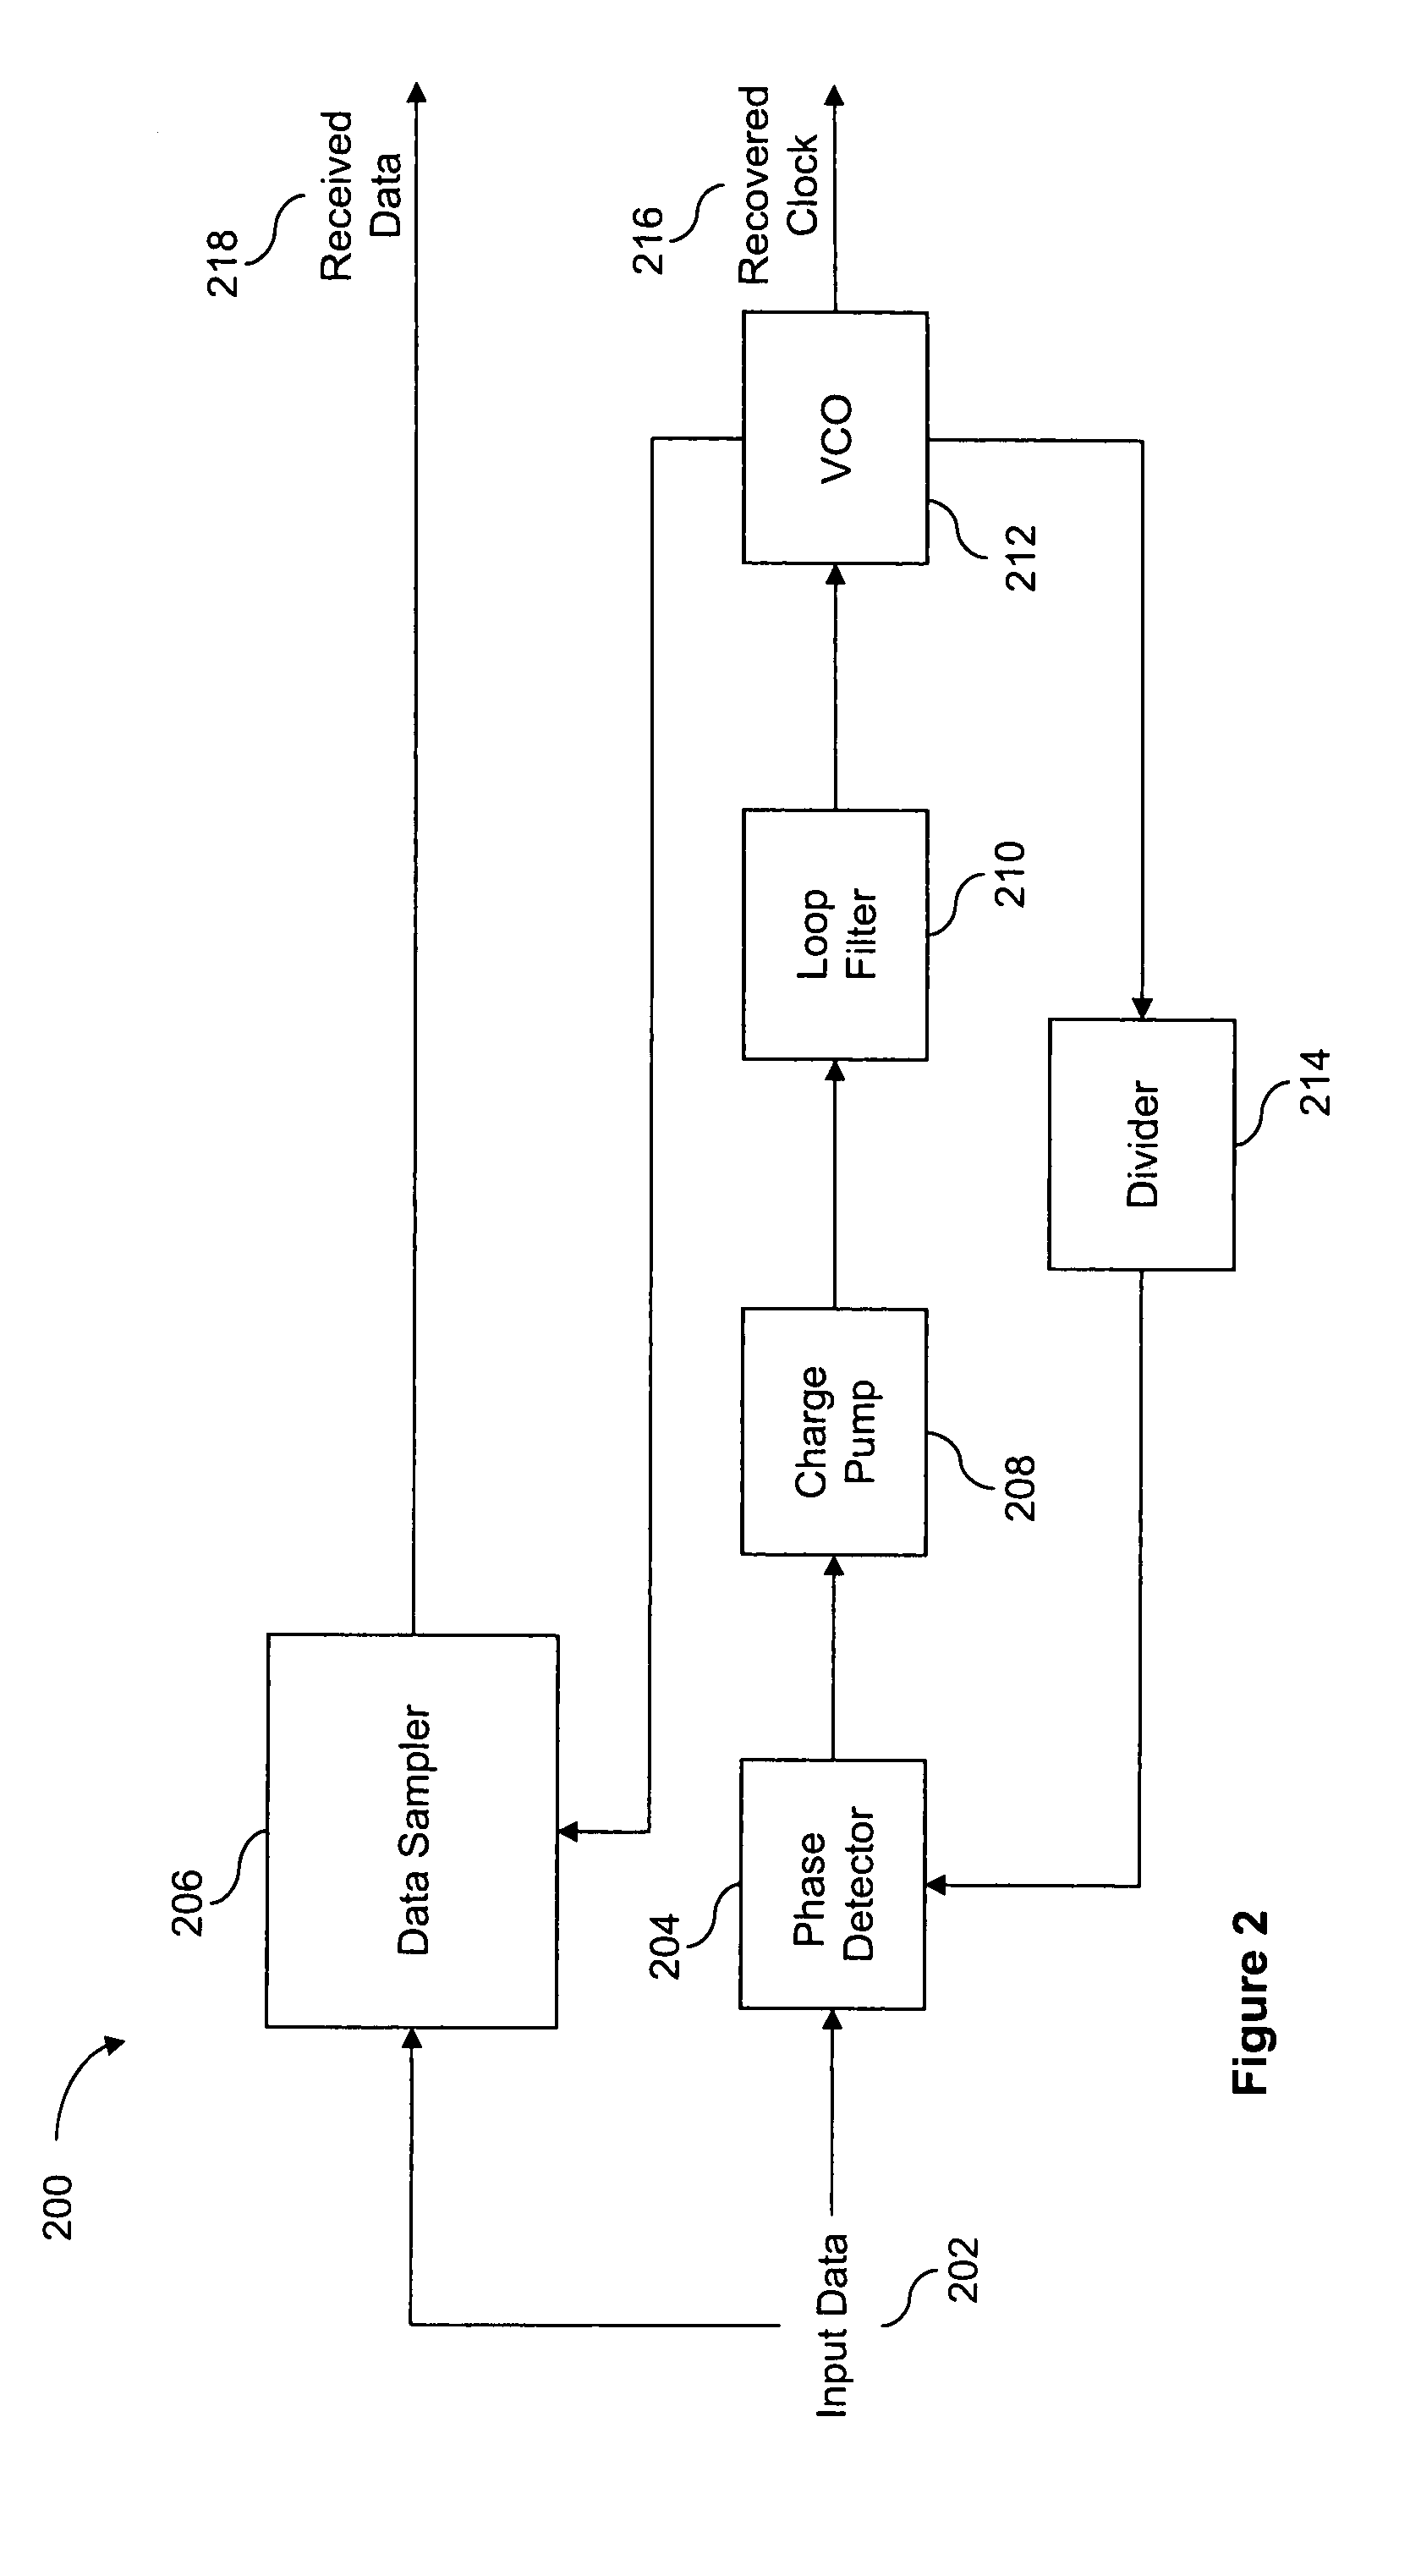 Method for binary clock and data recovery for fast acquisition and small tracking error